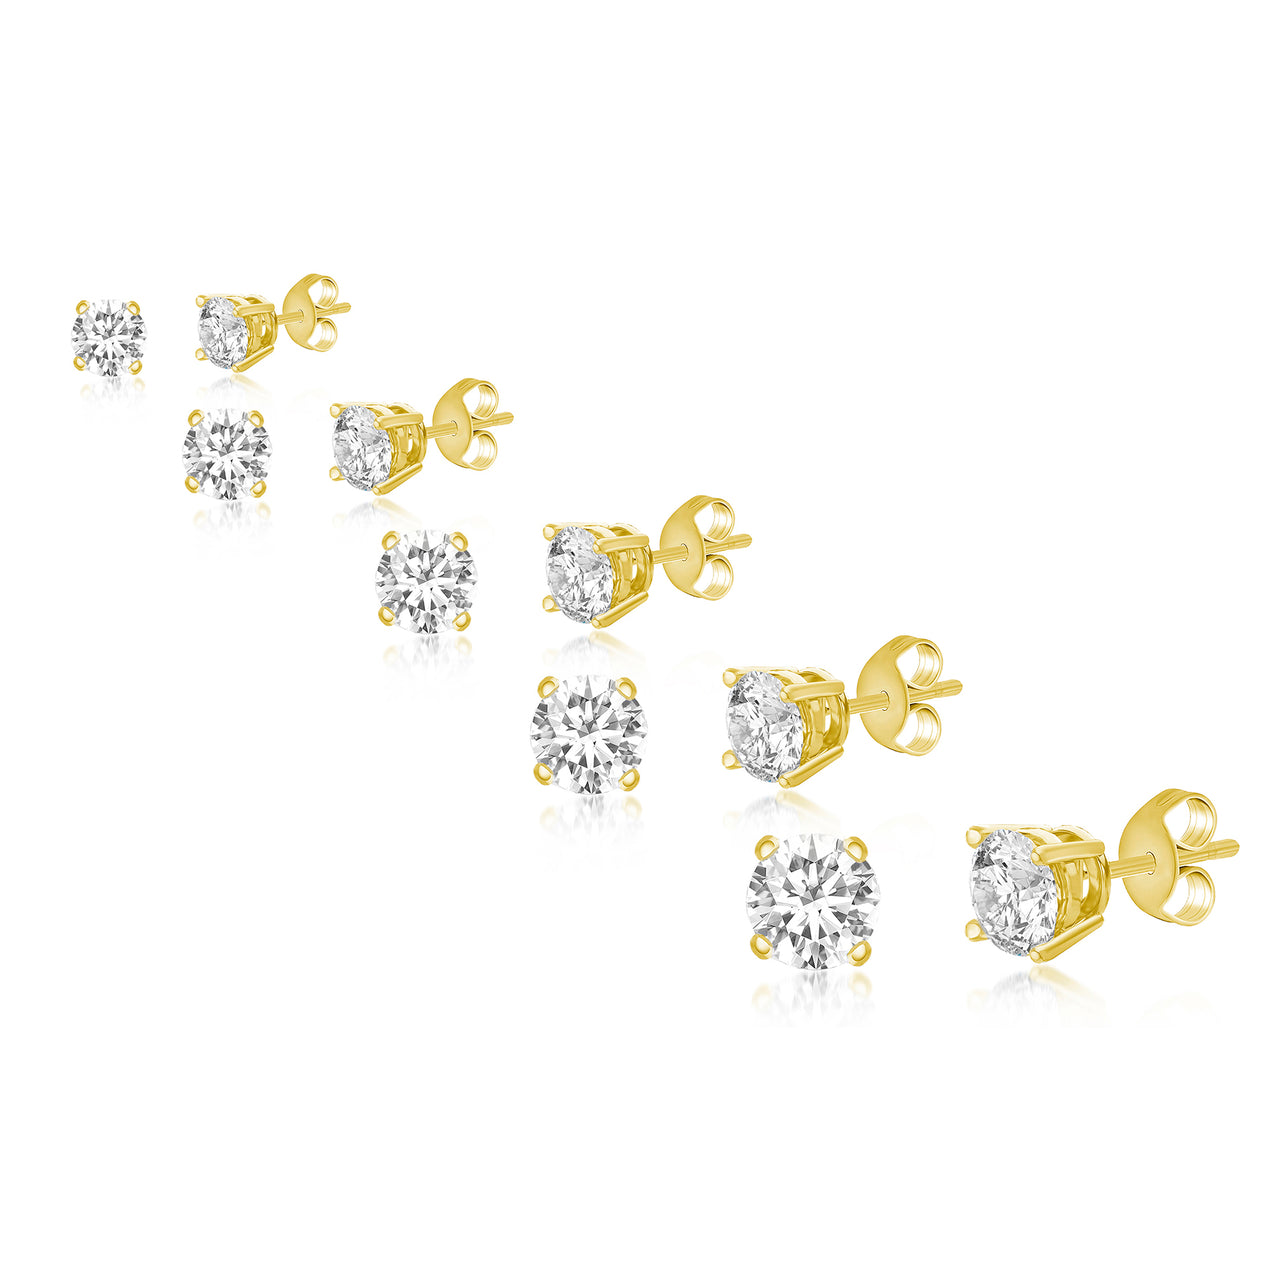 Lesa Michele Yellow Gold Plated Sterling Silver 3-7 mm 5 Piece Stud Earring Set